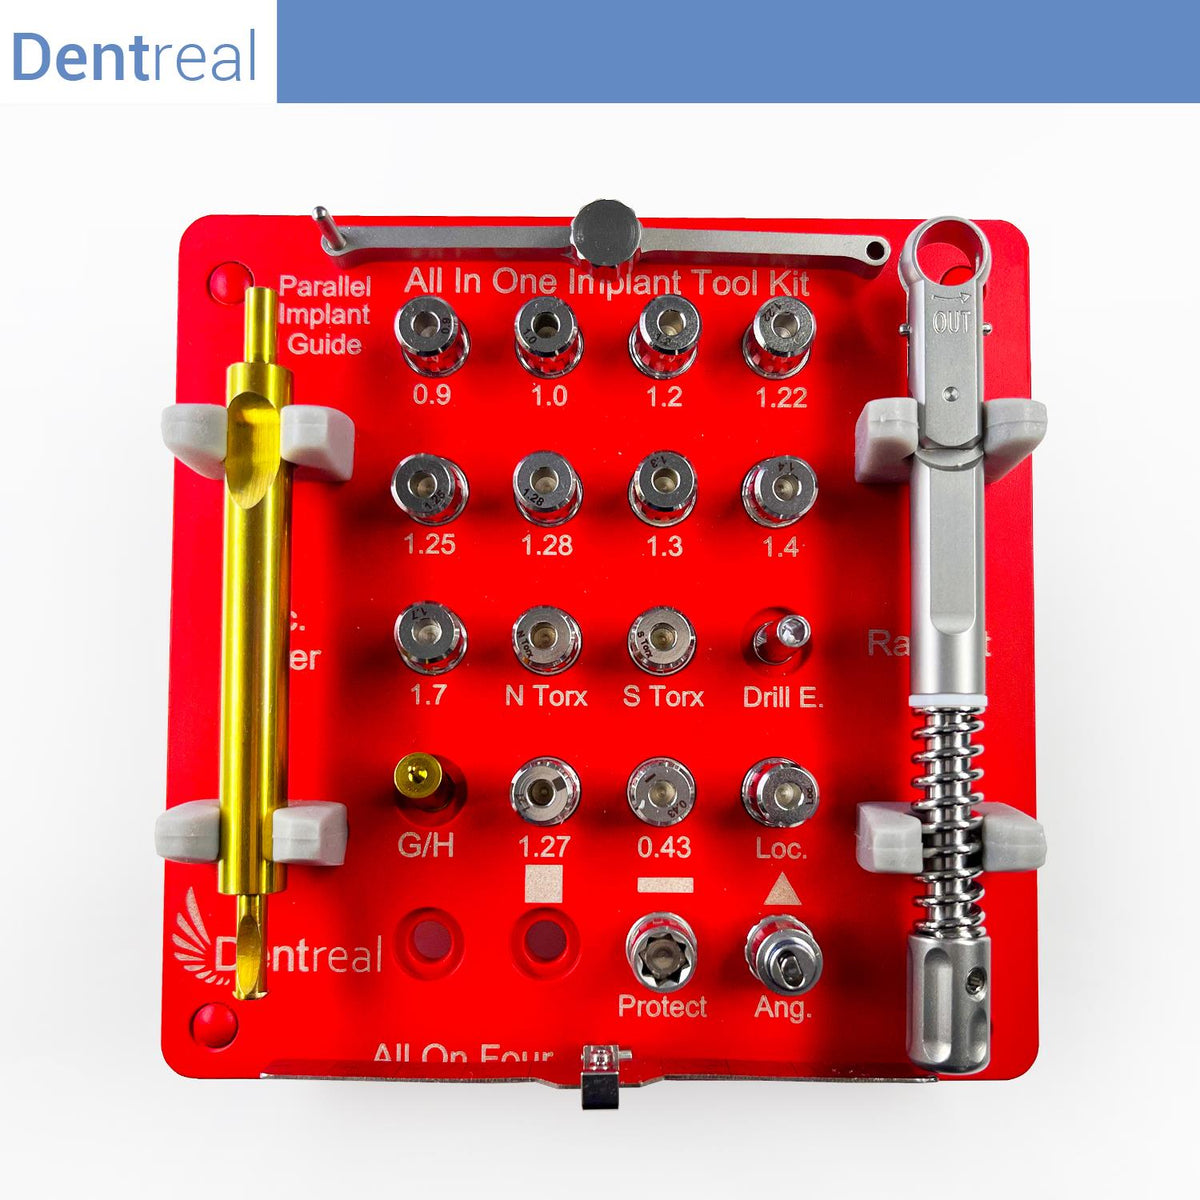 DentrealStore - Dentreal Universal All in One Implant Tool Screwdriver Full Set